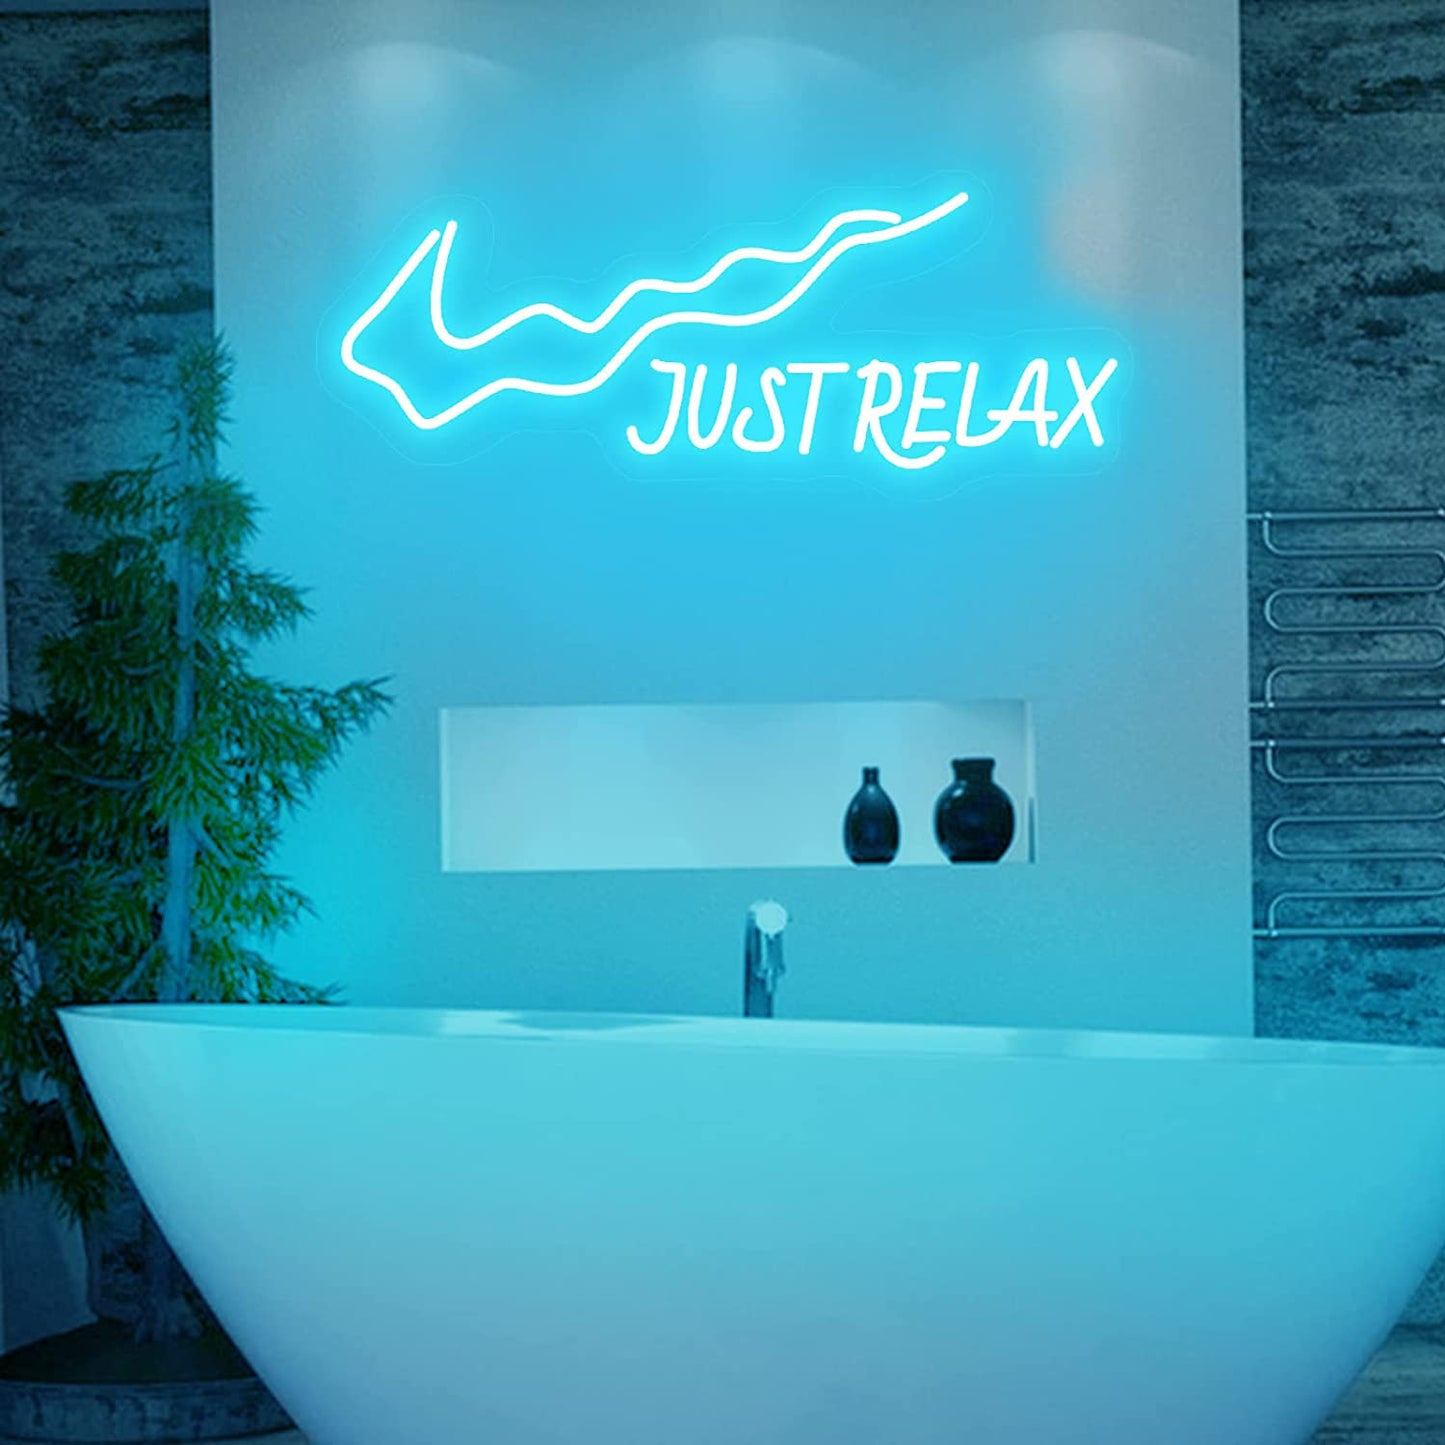 JUST RELAX Neon LED sign